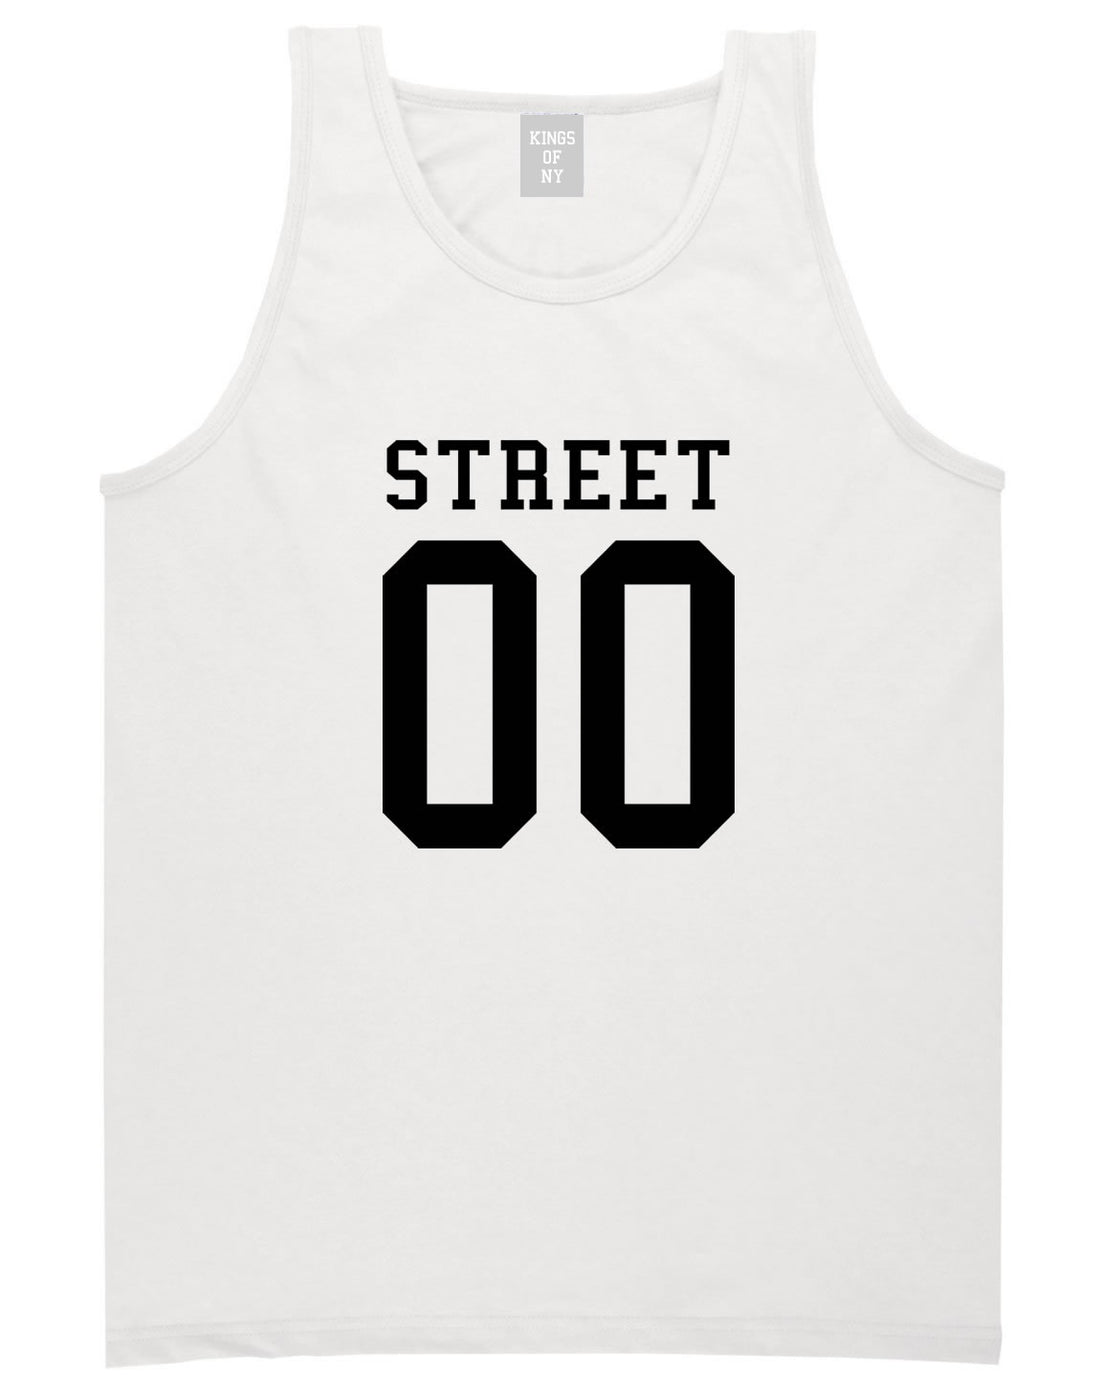 Street Team 00 Jersey Tank Top in White By Kings Of NY